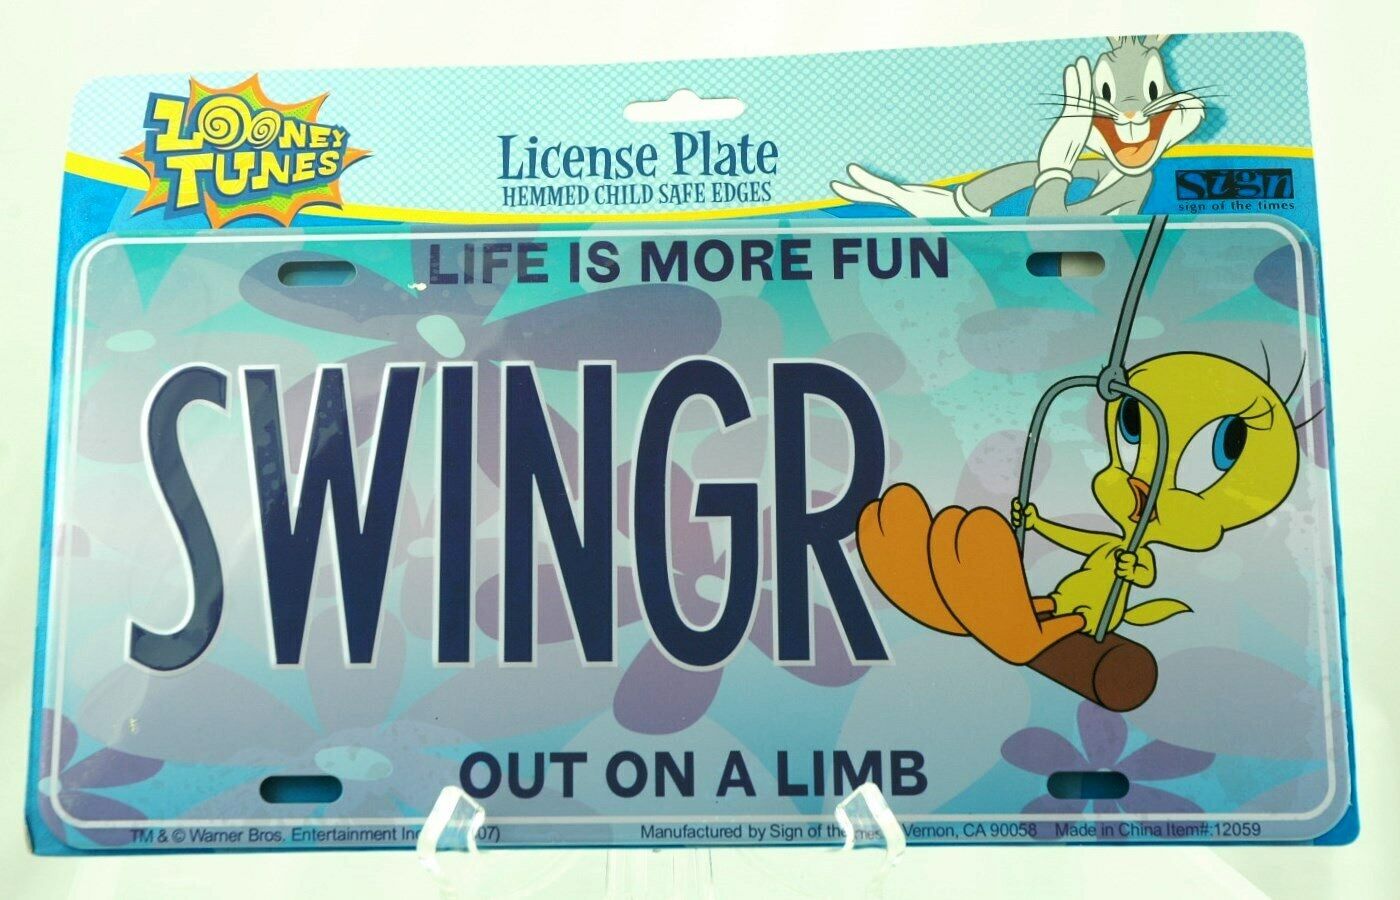 SWINGR TWEETY BIRD Life is More Fun Out on a Limb Looney Tunes License Plate